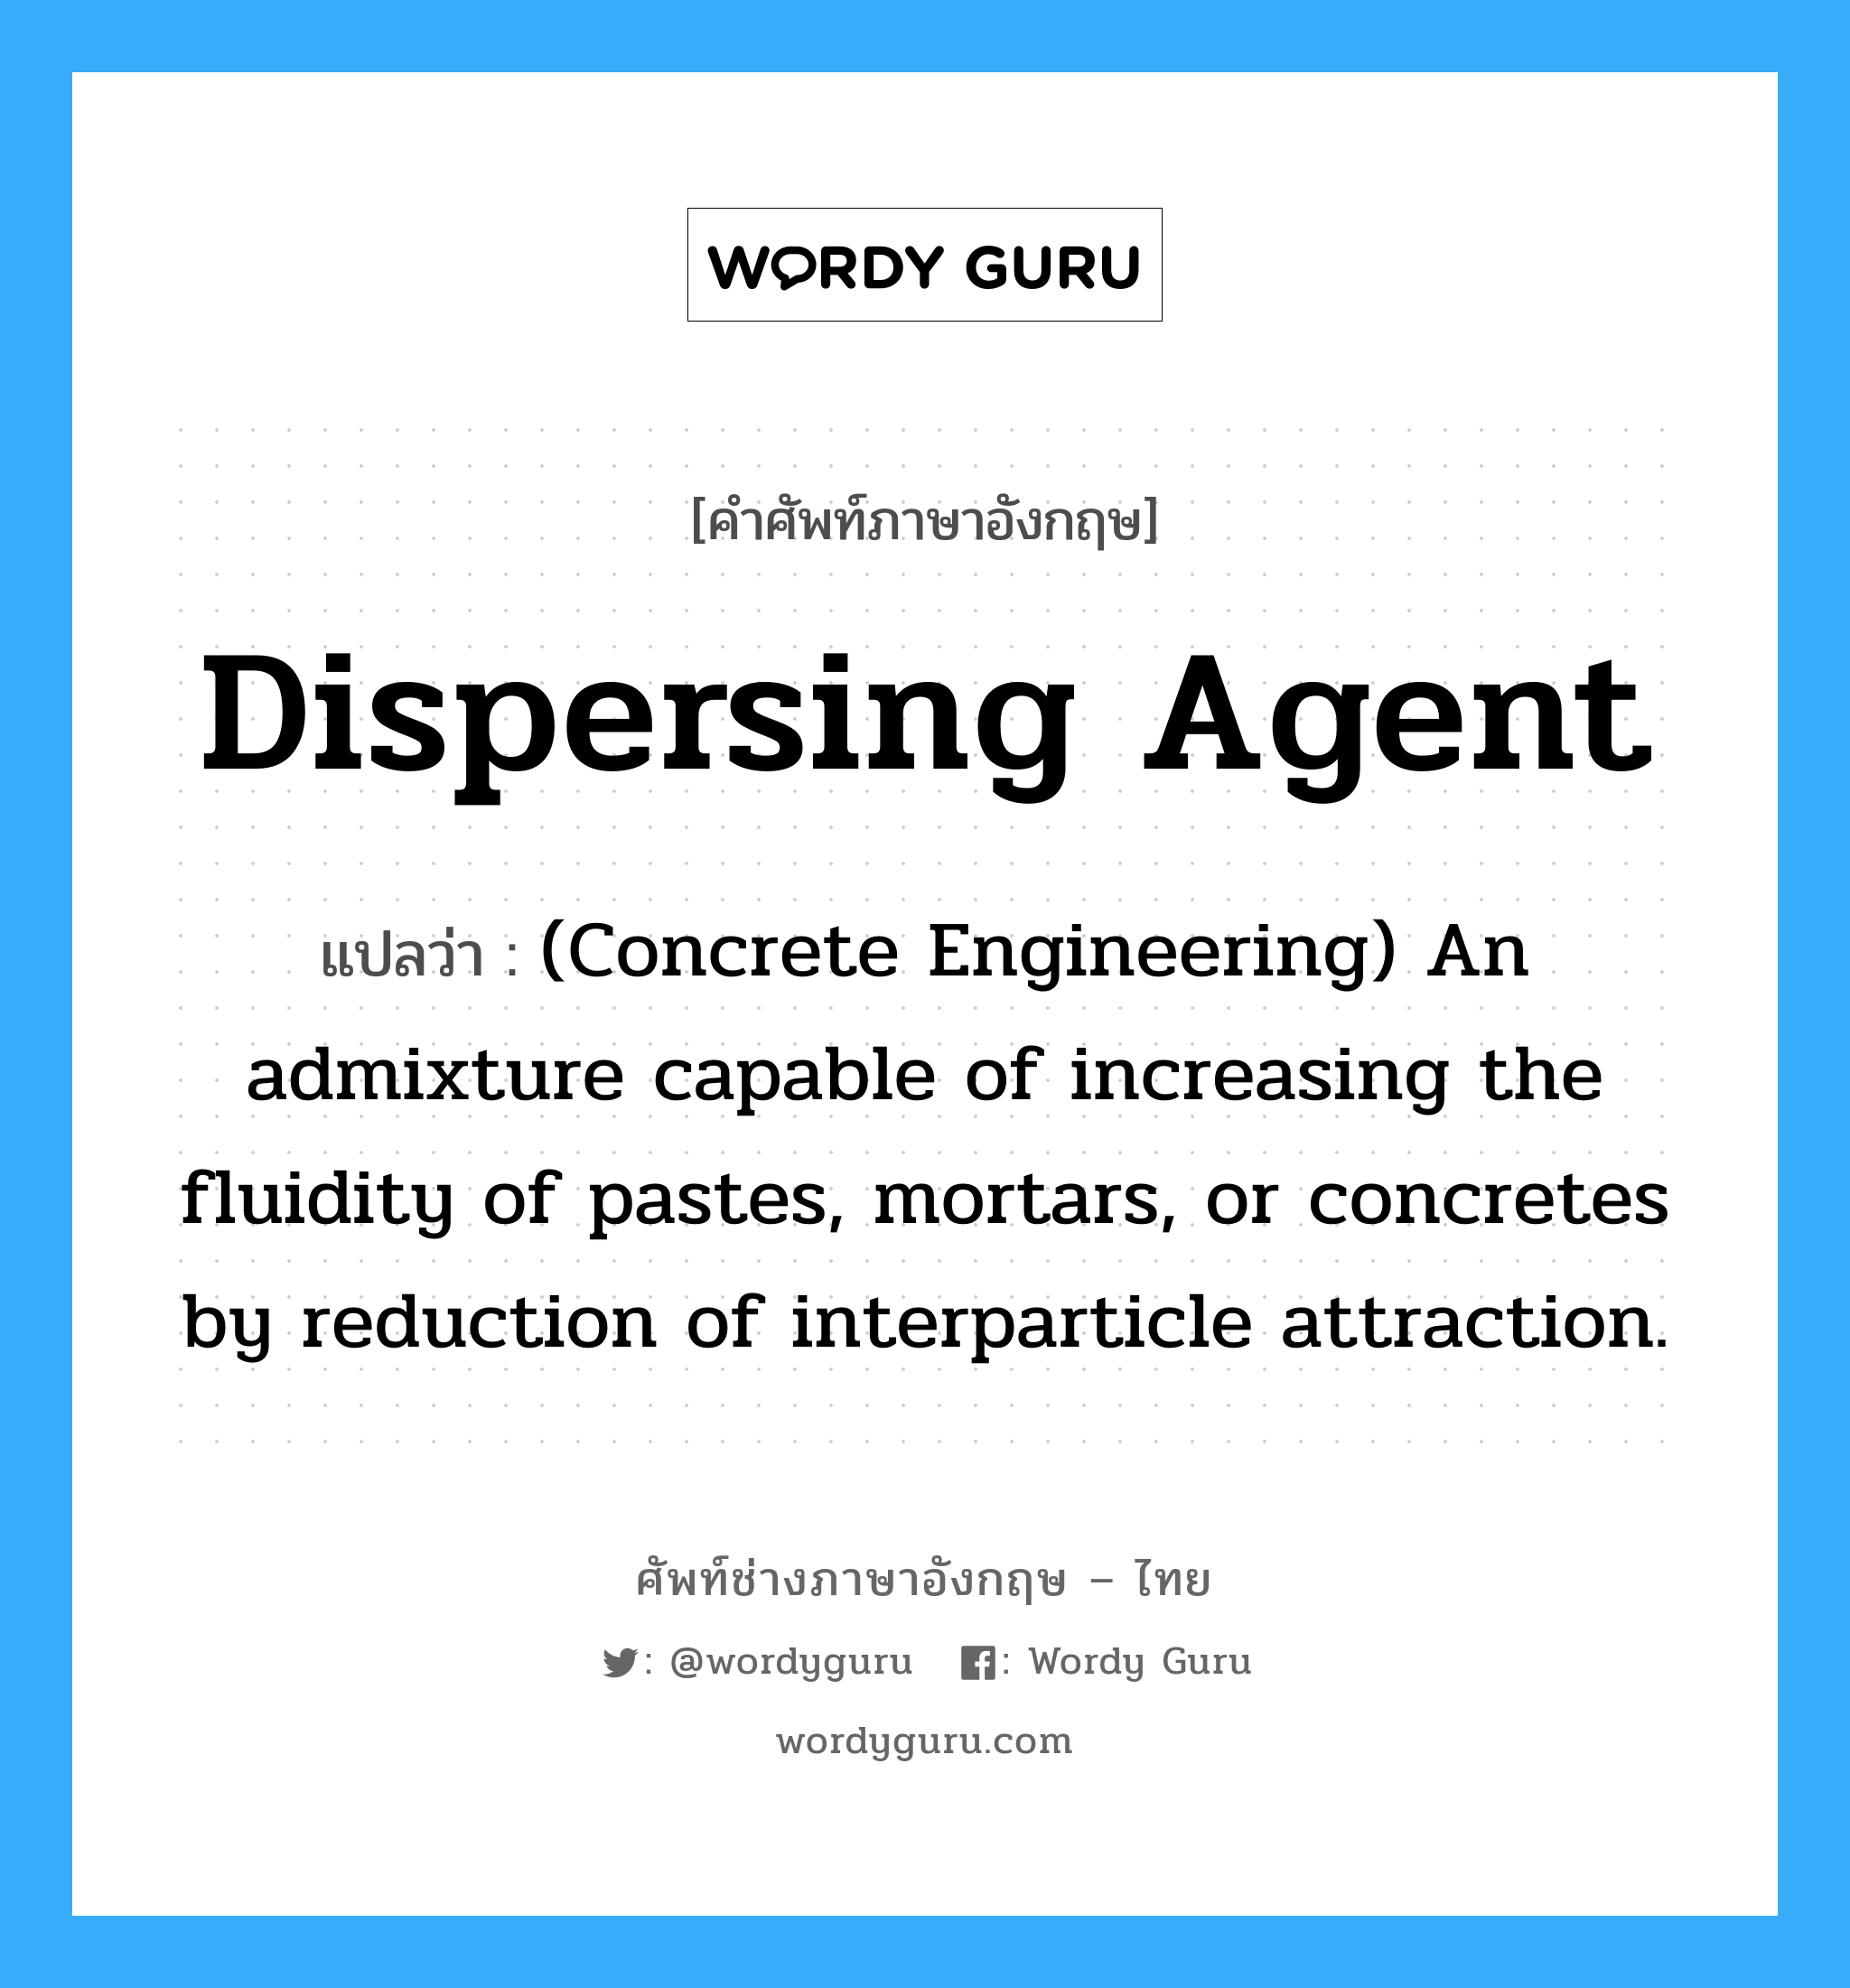 (Concrete Engineering) An admixture capable of increasing the fluidity of pastes, mortars, or concretes by reduction of interparticle attraction. ภาษาอังกฤษ?, คำศัพท์ช่างภาษาอังกฤษ - ไทย (Concrete Engineering) An admixture capable of increasing the fluidity of pastes, mortars, or concretes by reduction of interparticle attraction. คำศัพท์ภาษาอังกฤษ (Concrete Engineering) An admixture capable of increasing the fluidity of pastes, mortars, or concretes by reduction of interparticle attraction. แปลว่า Dispersing Agent